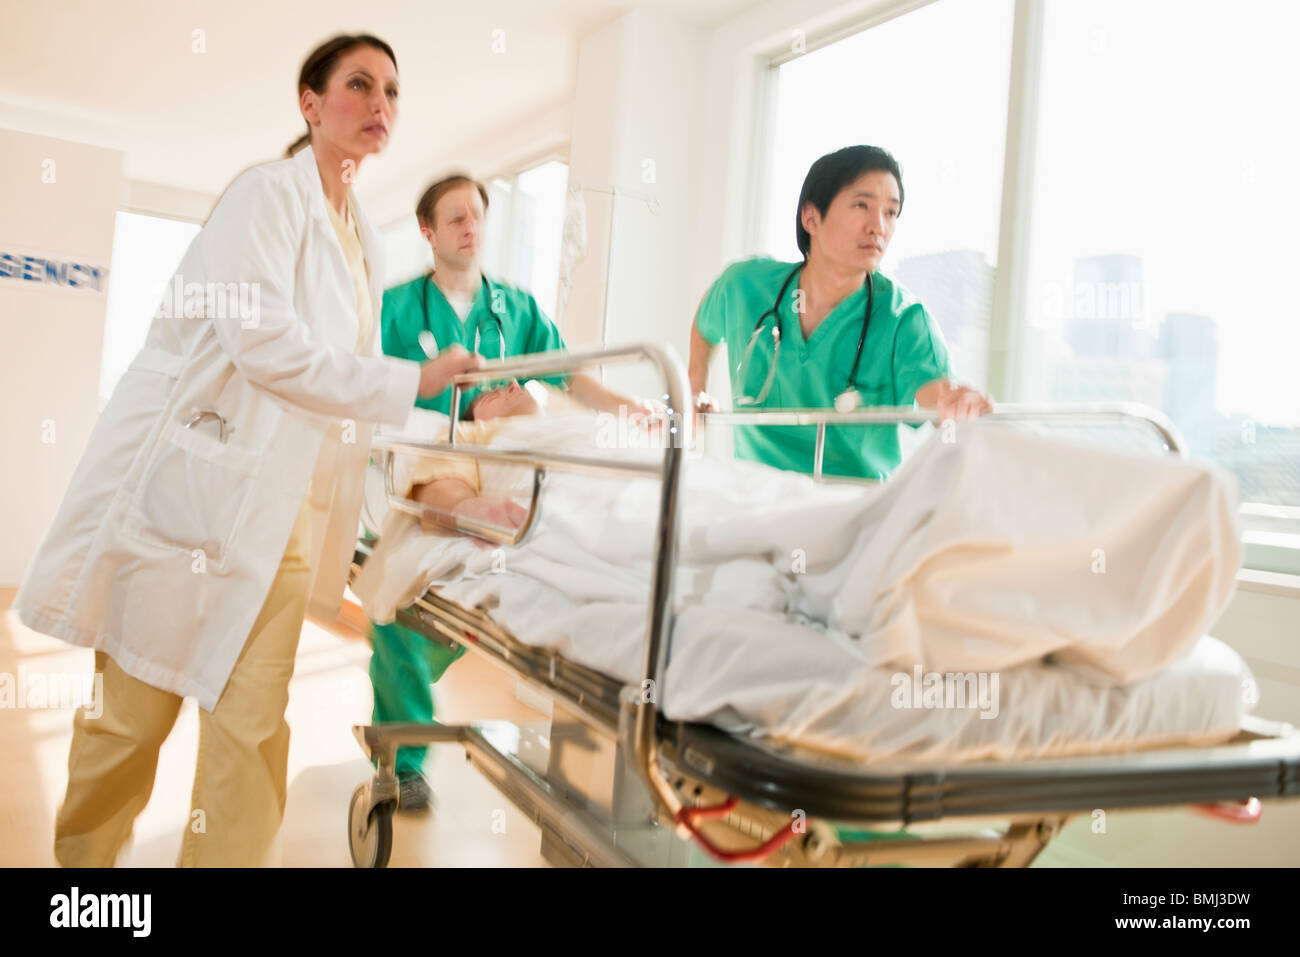 Healthcare workers pushing gurney in emergency room Stock Photo